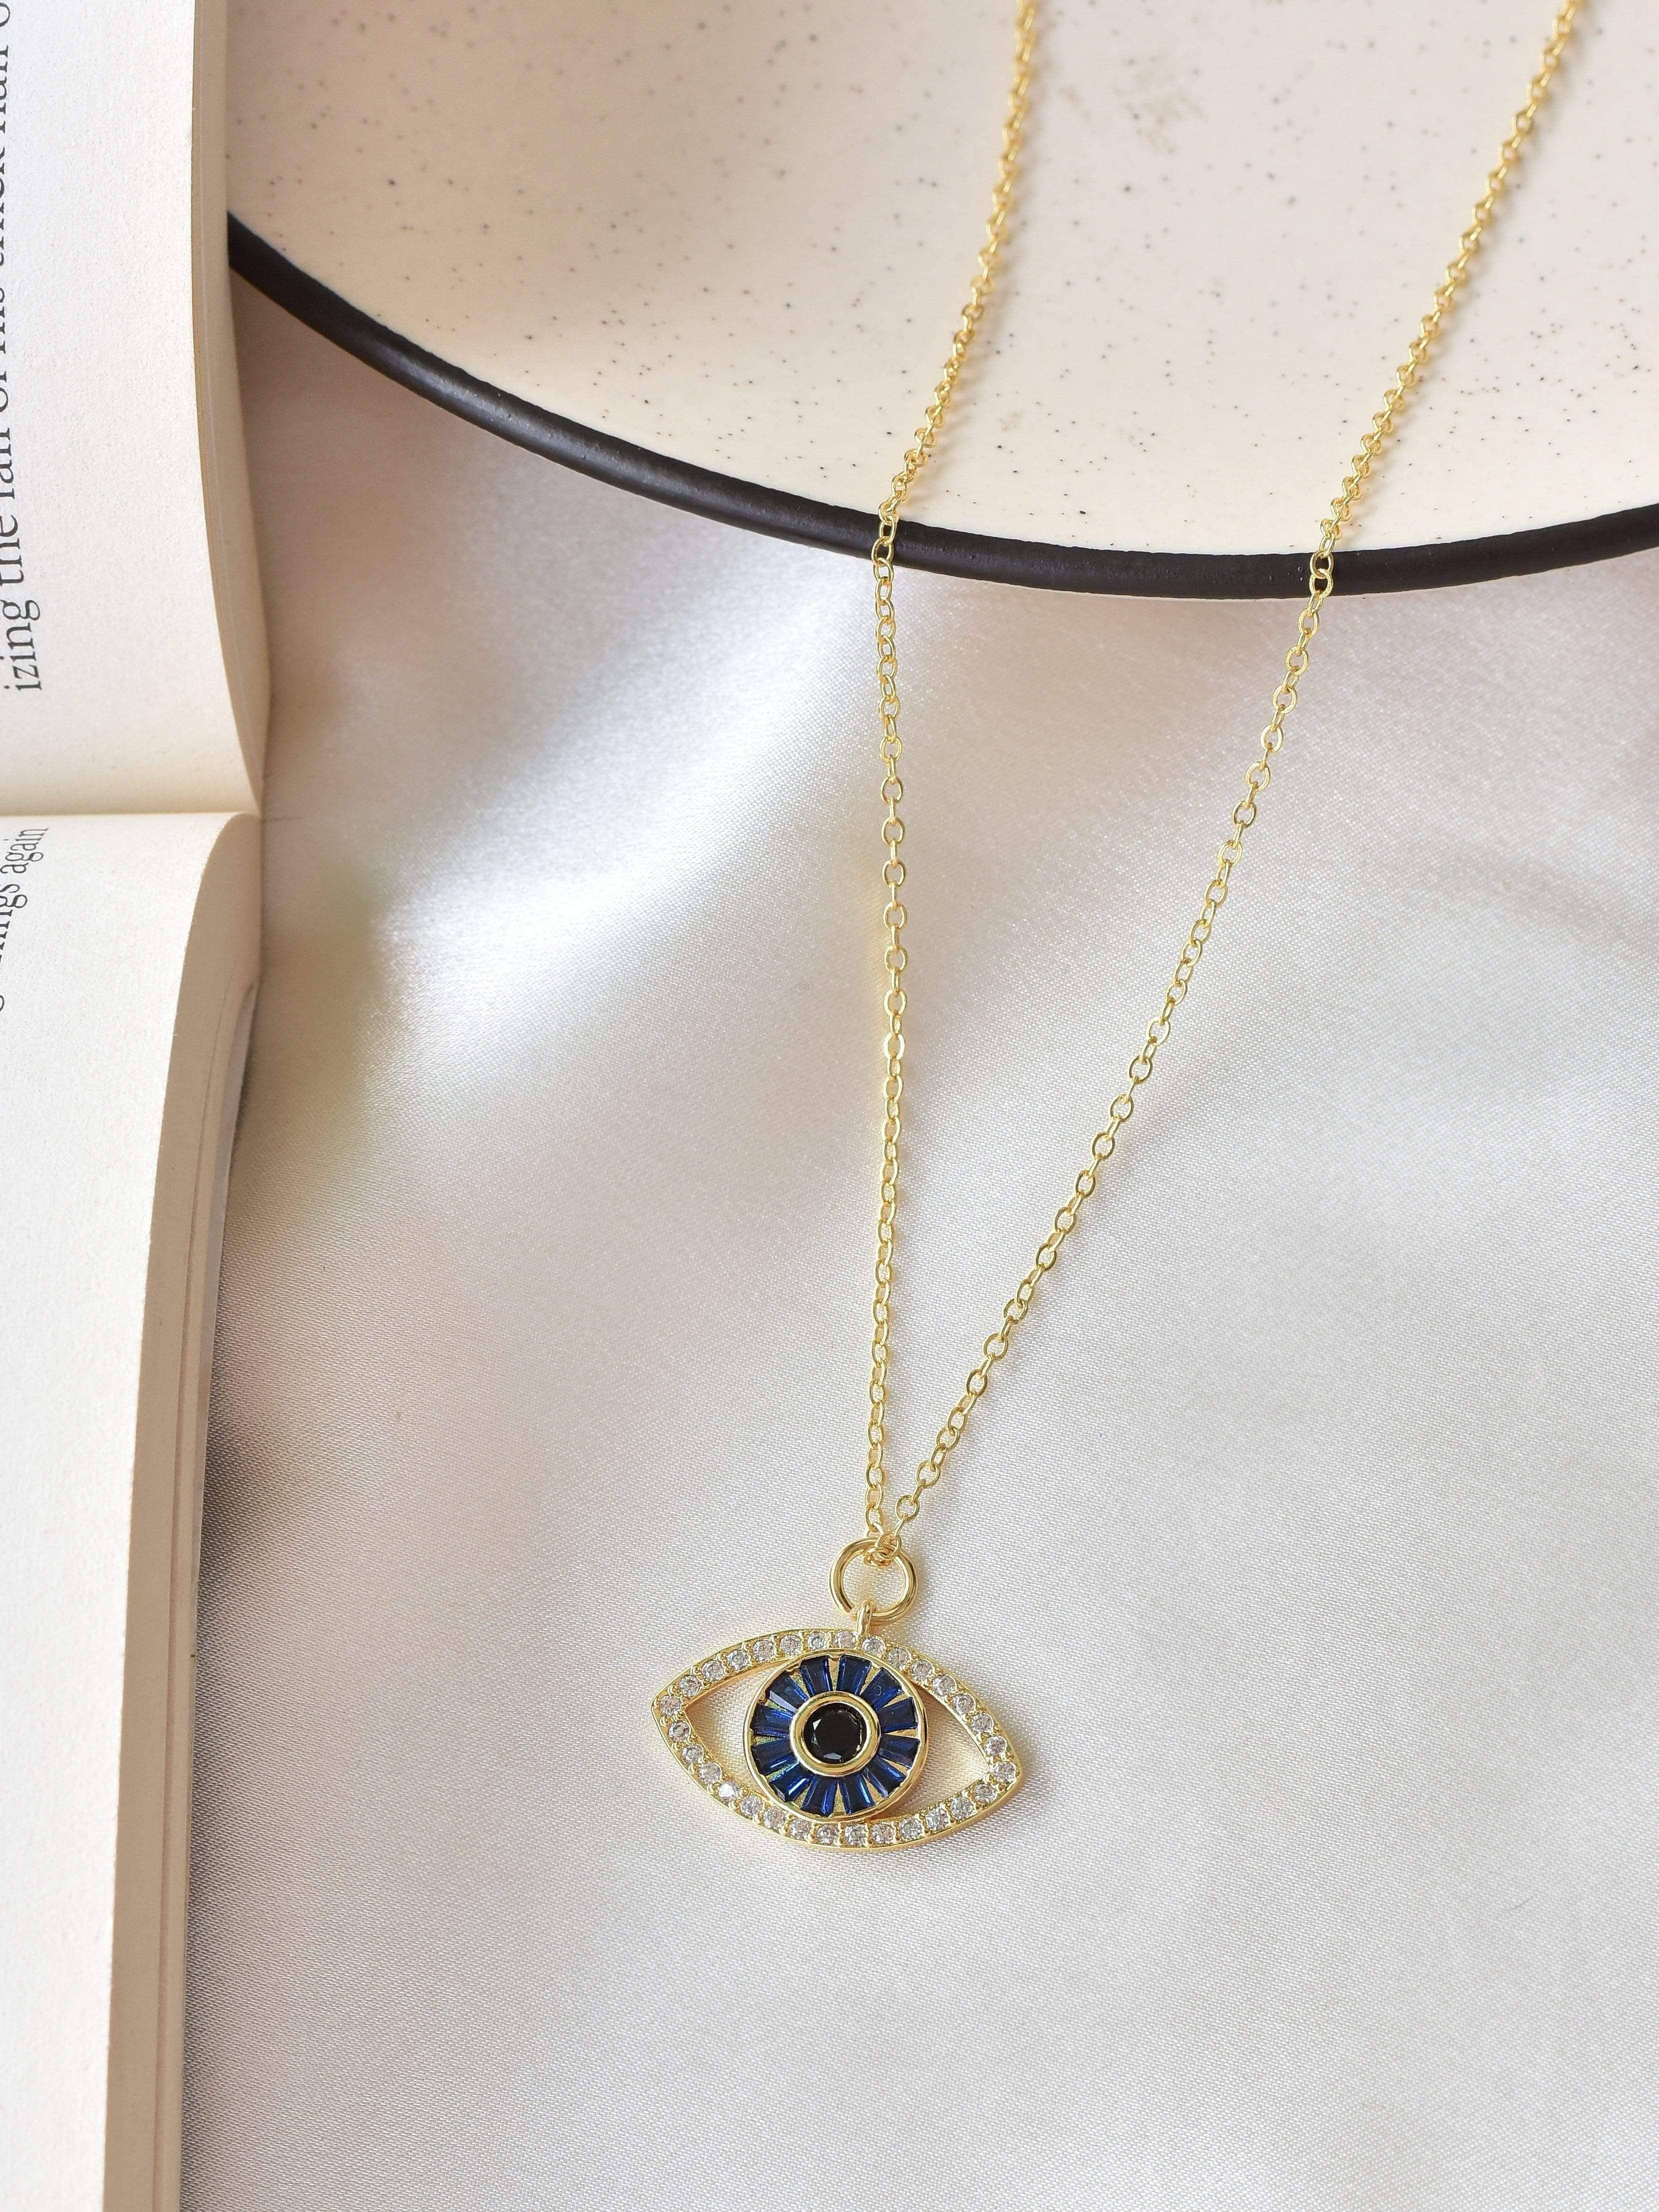 Cable Collectibles® Evil Eye Necklace in 18K Yellow Gold with Pavé Blue  Sapphires and Diamonds, 11mm | David Yurman